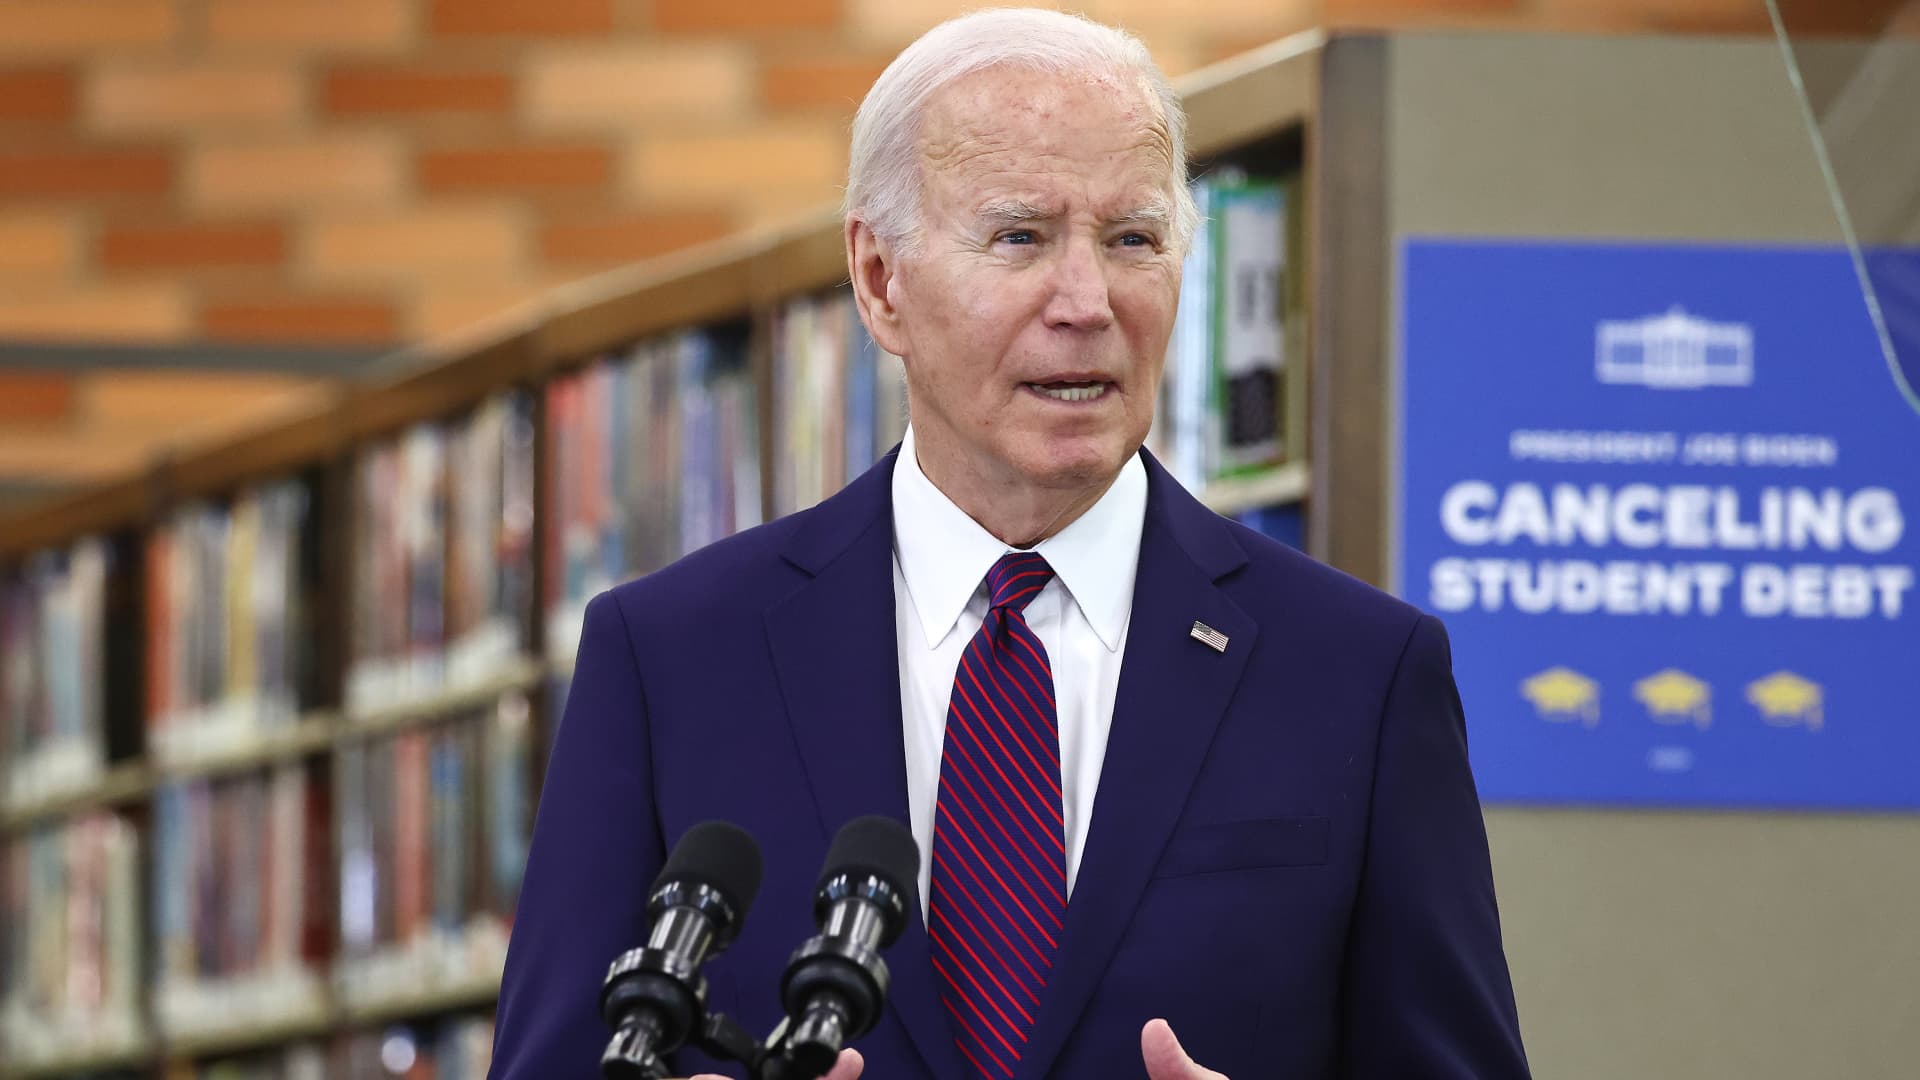 Here's how Biden's new student loan forgiveness plan differs from his first 